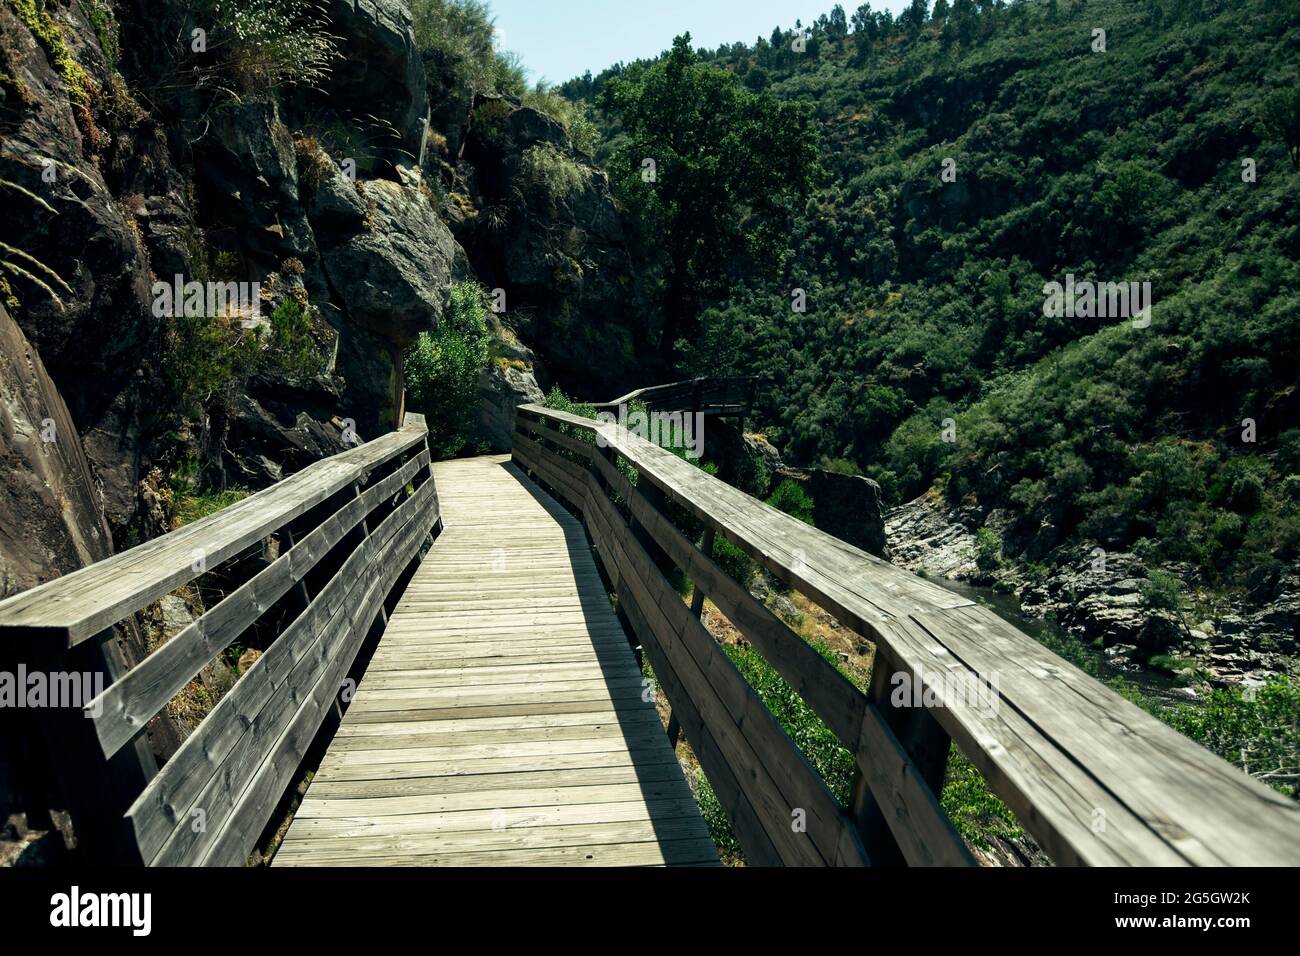 Paiva walkways along the River Paiva, Portugal. Stock Photo